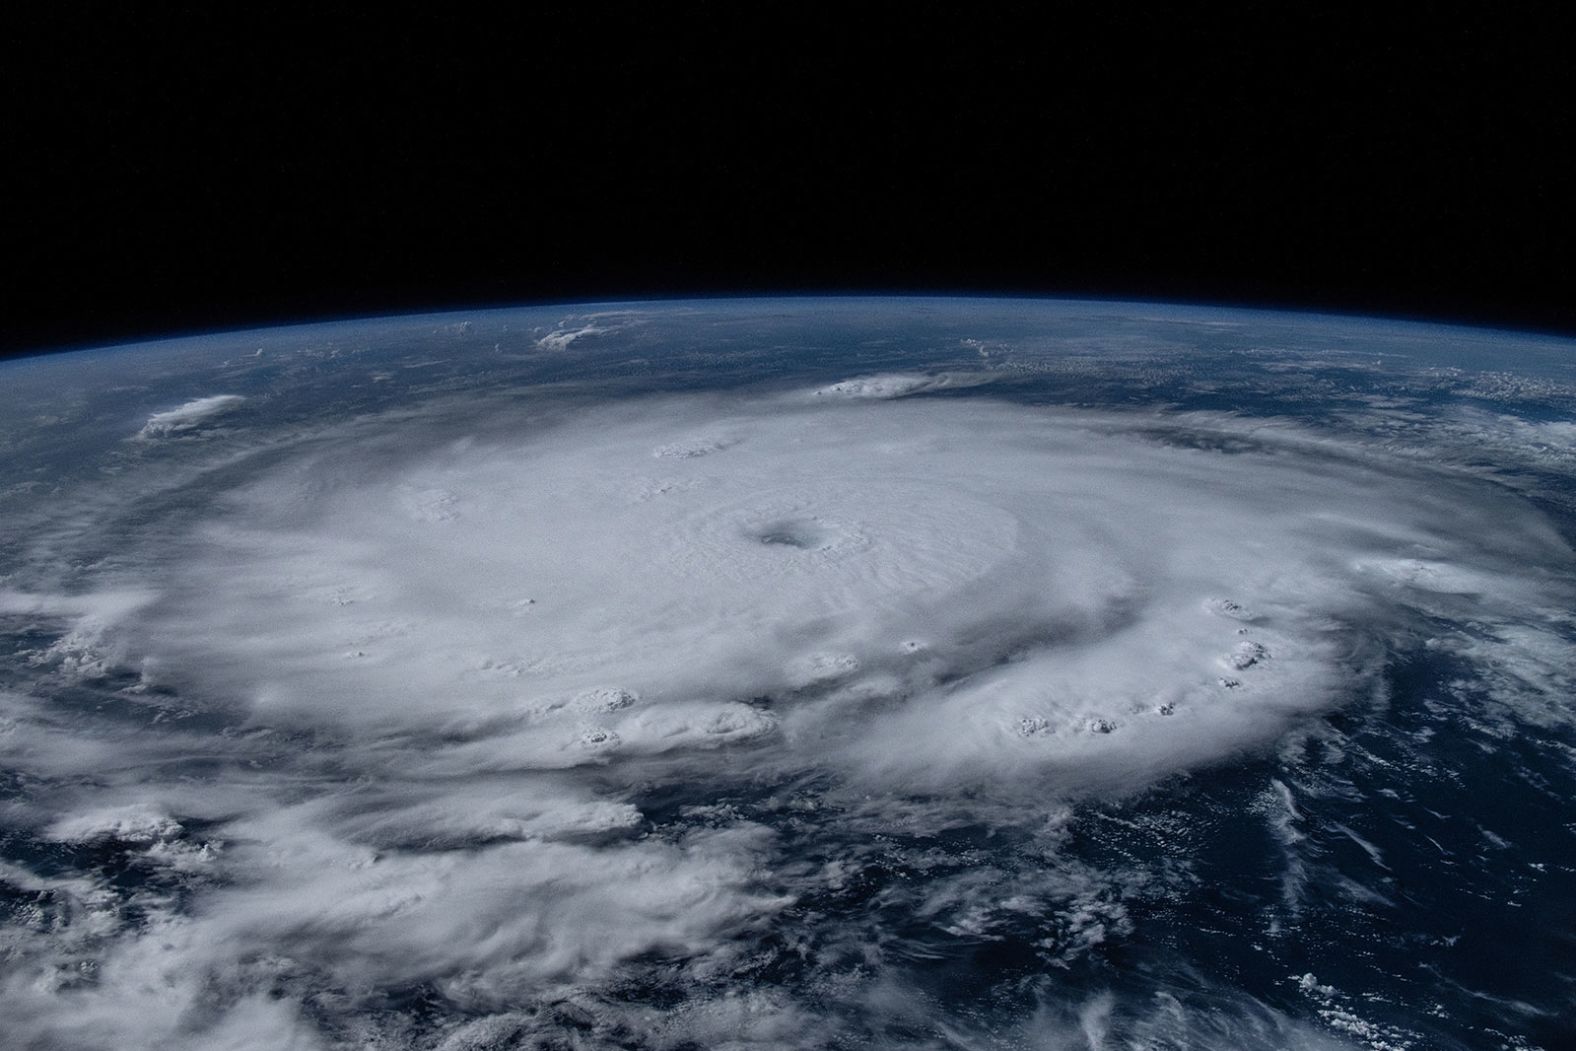 NASA astronaut Matthew Dominick shared this photo of the hurricane as seen from space on Monday. Looking at the hurricane with the camera gave him "both an eerie feeling and a high level of weather nerd excitement," he said in a <a href="https://x.com/dominickmatthew/status/1807850263174066472" target="_blank">post on X</a>.